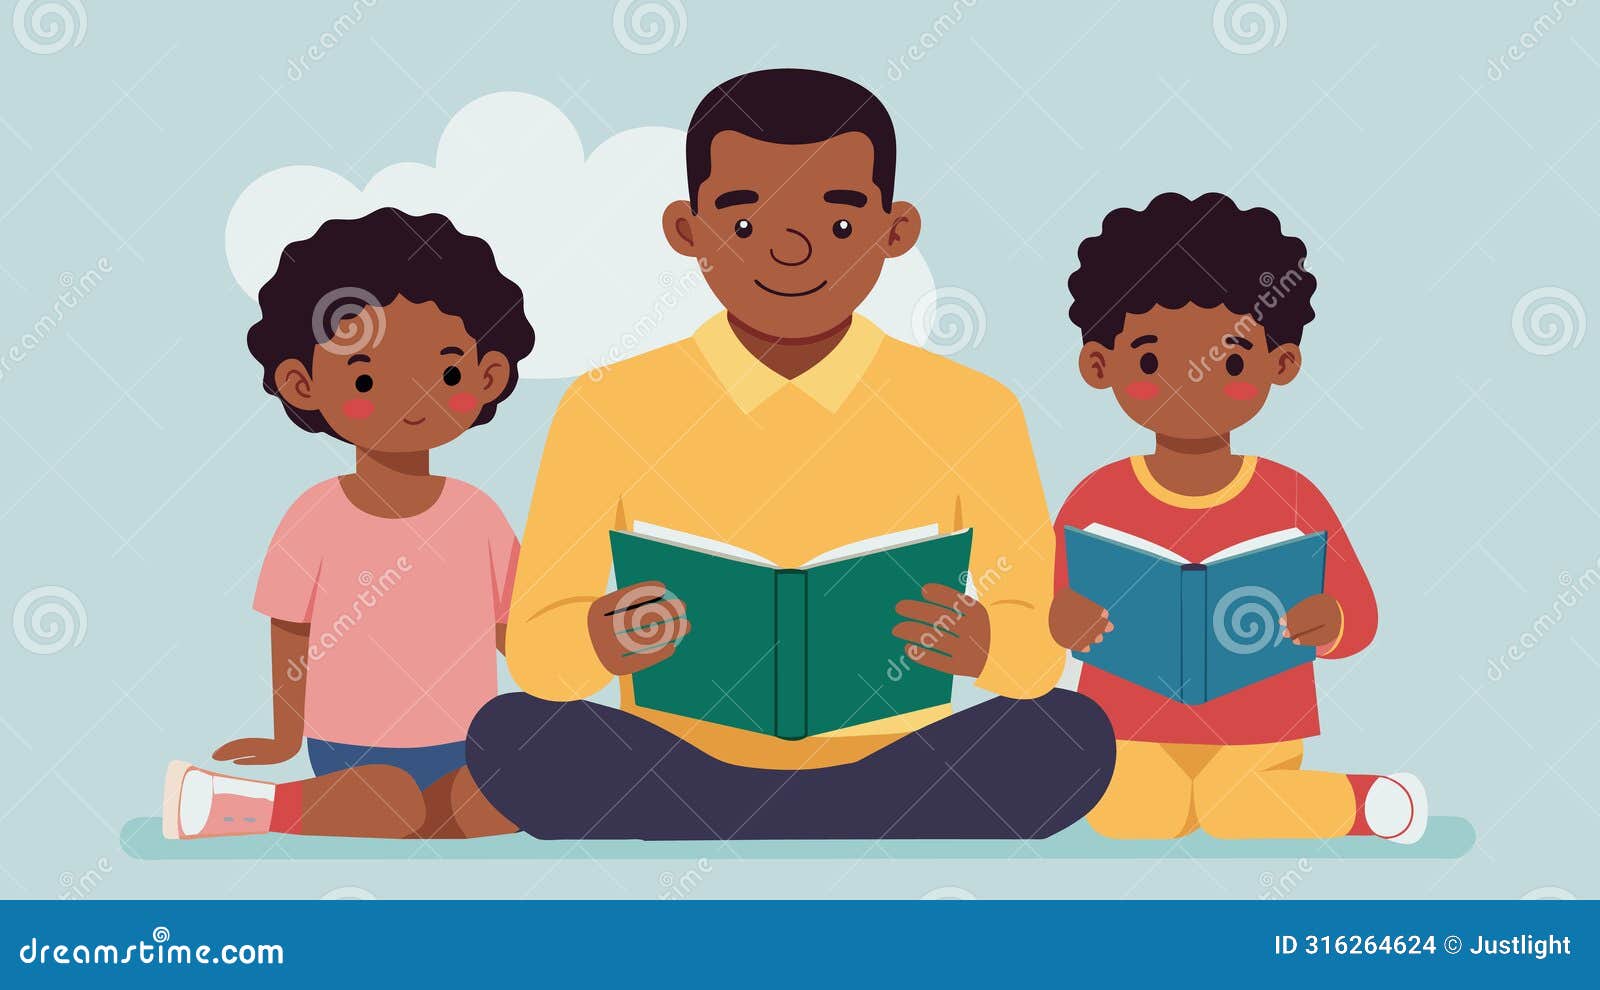 a father sits with his children a sense of determination on his face as he reads aloud stories of resilience and